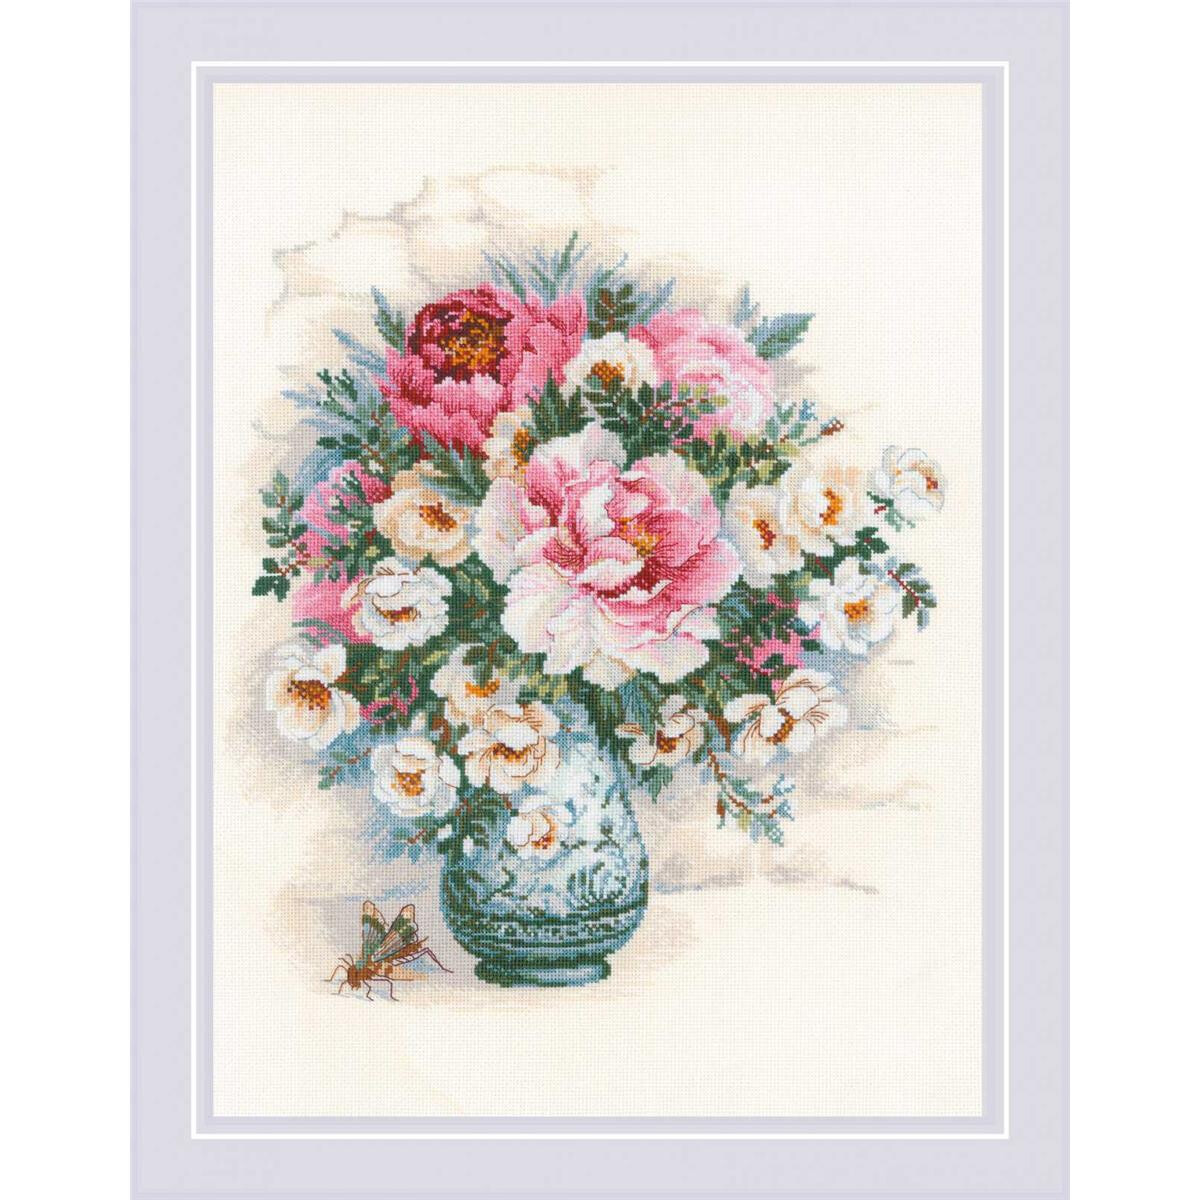 Riolis counted cross stitch kit "Peonies and Wild...